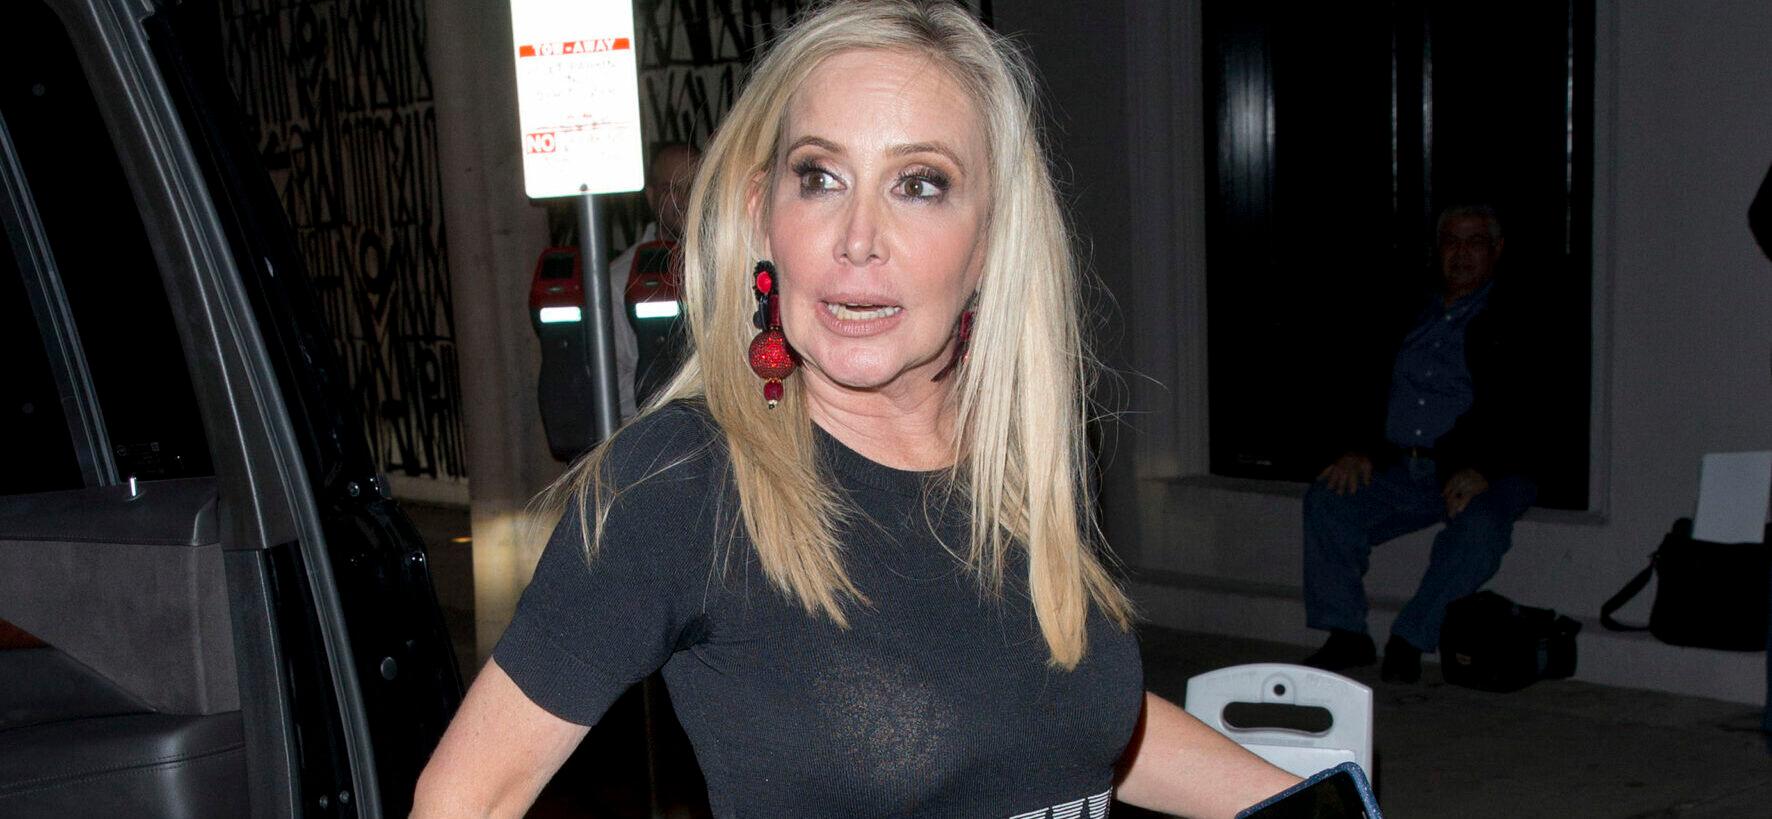 ‘RHOC’ Shannon Beador’s Ex Slams Her With Promissory Fraud Suit After DUI Drama